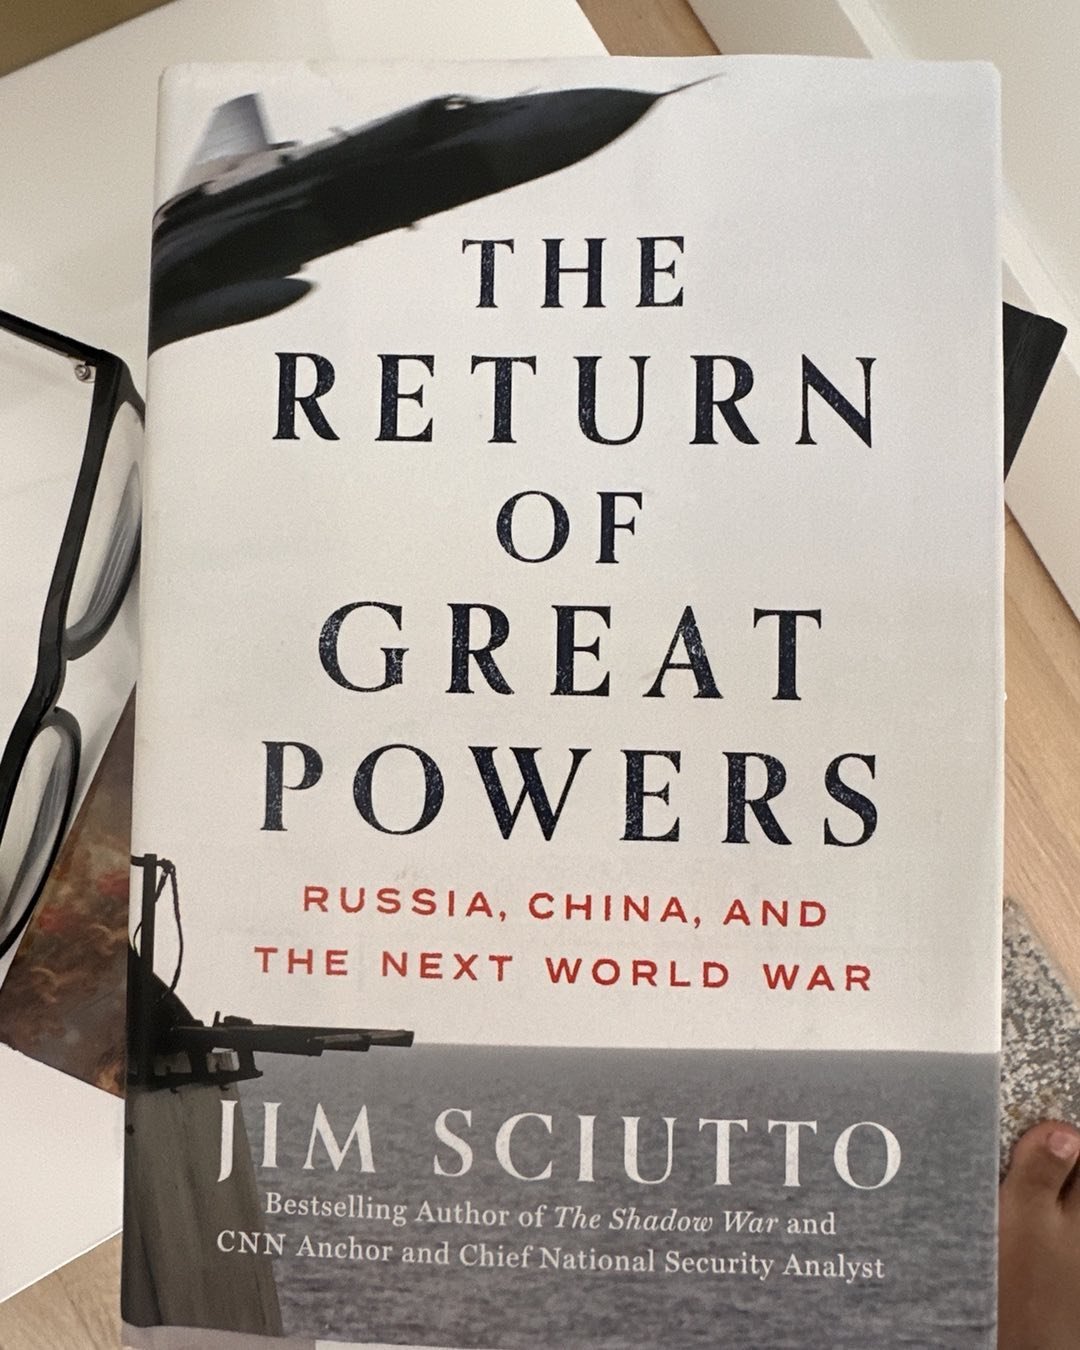 Feed your mind!! Learn. Read. Knowledge is power!! This is some serious stuff!! @jimsciutto incredible work!! Thank you for this! #thereturnofgreatpowers